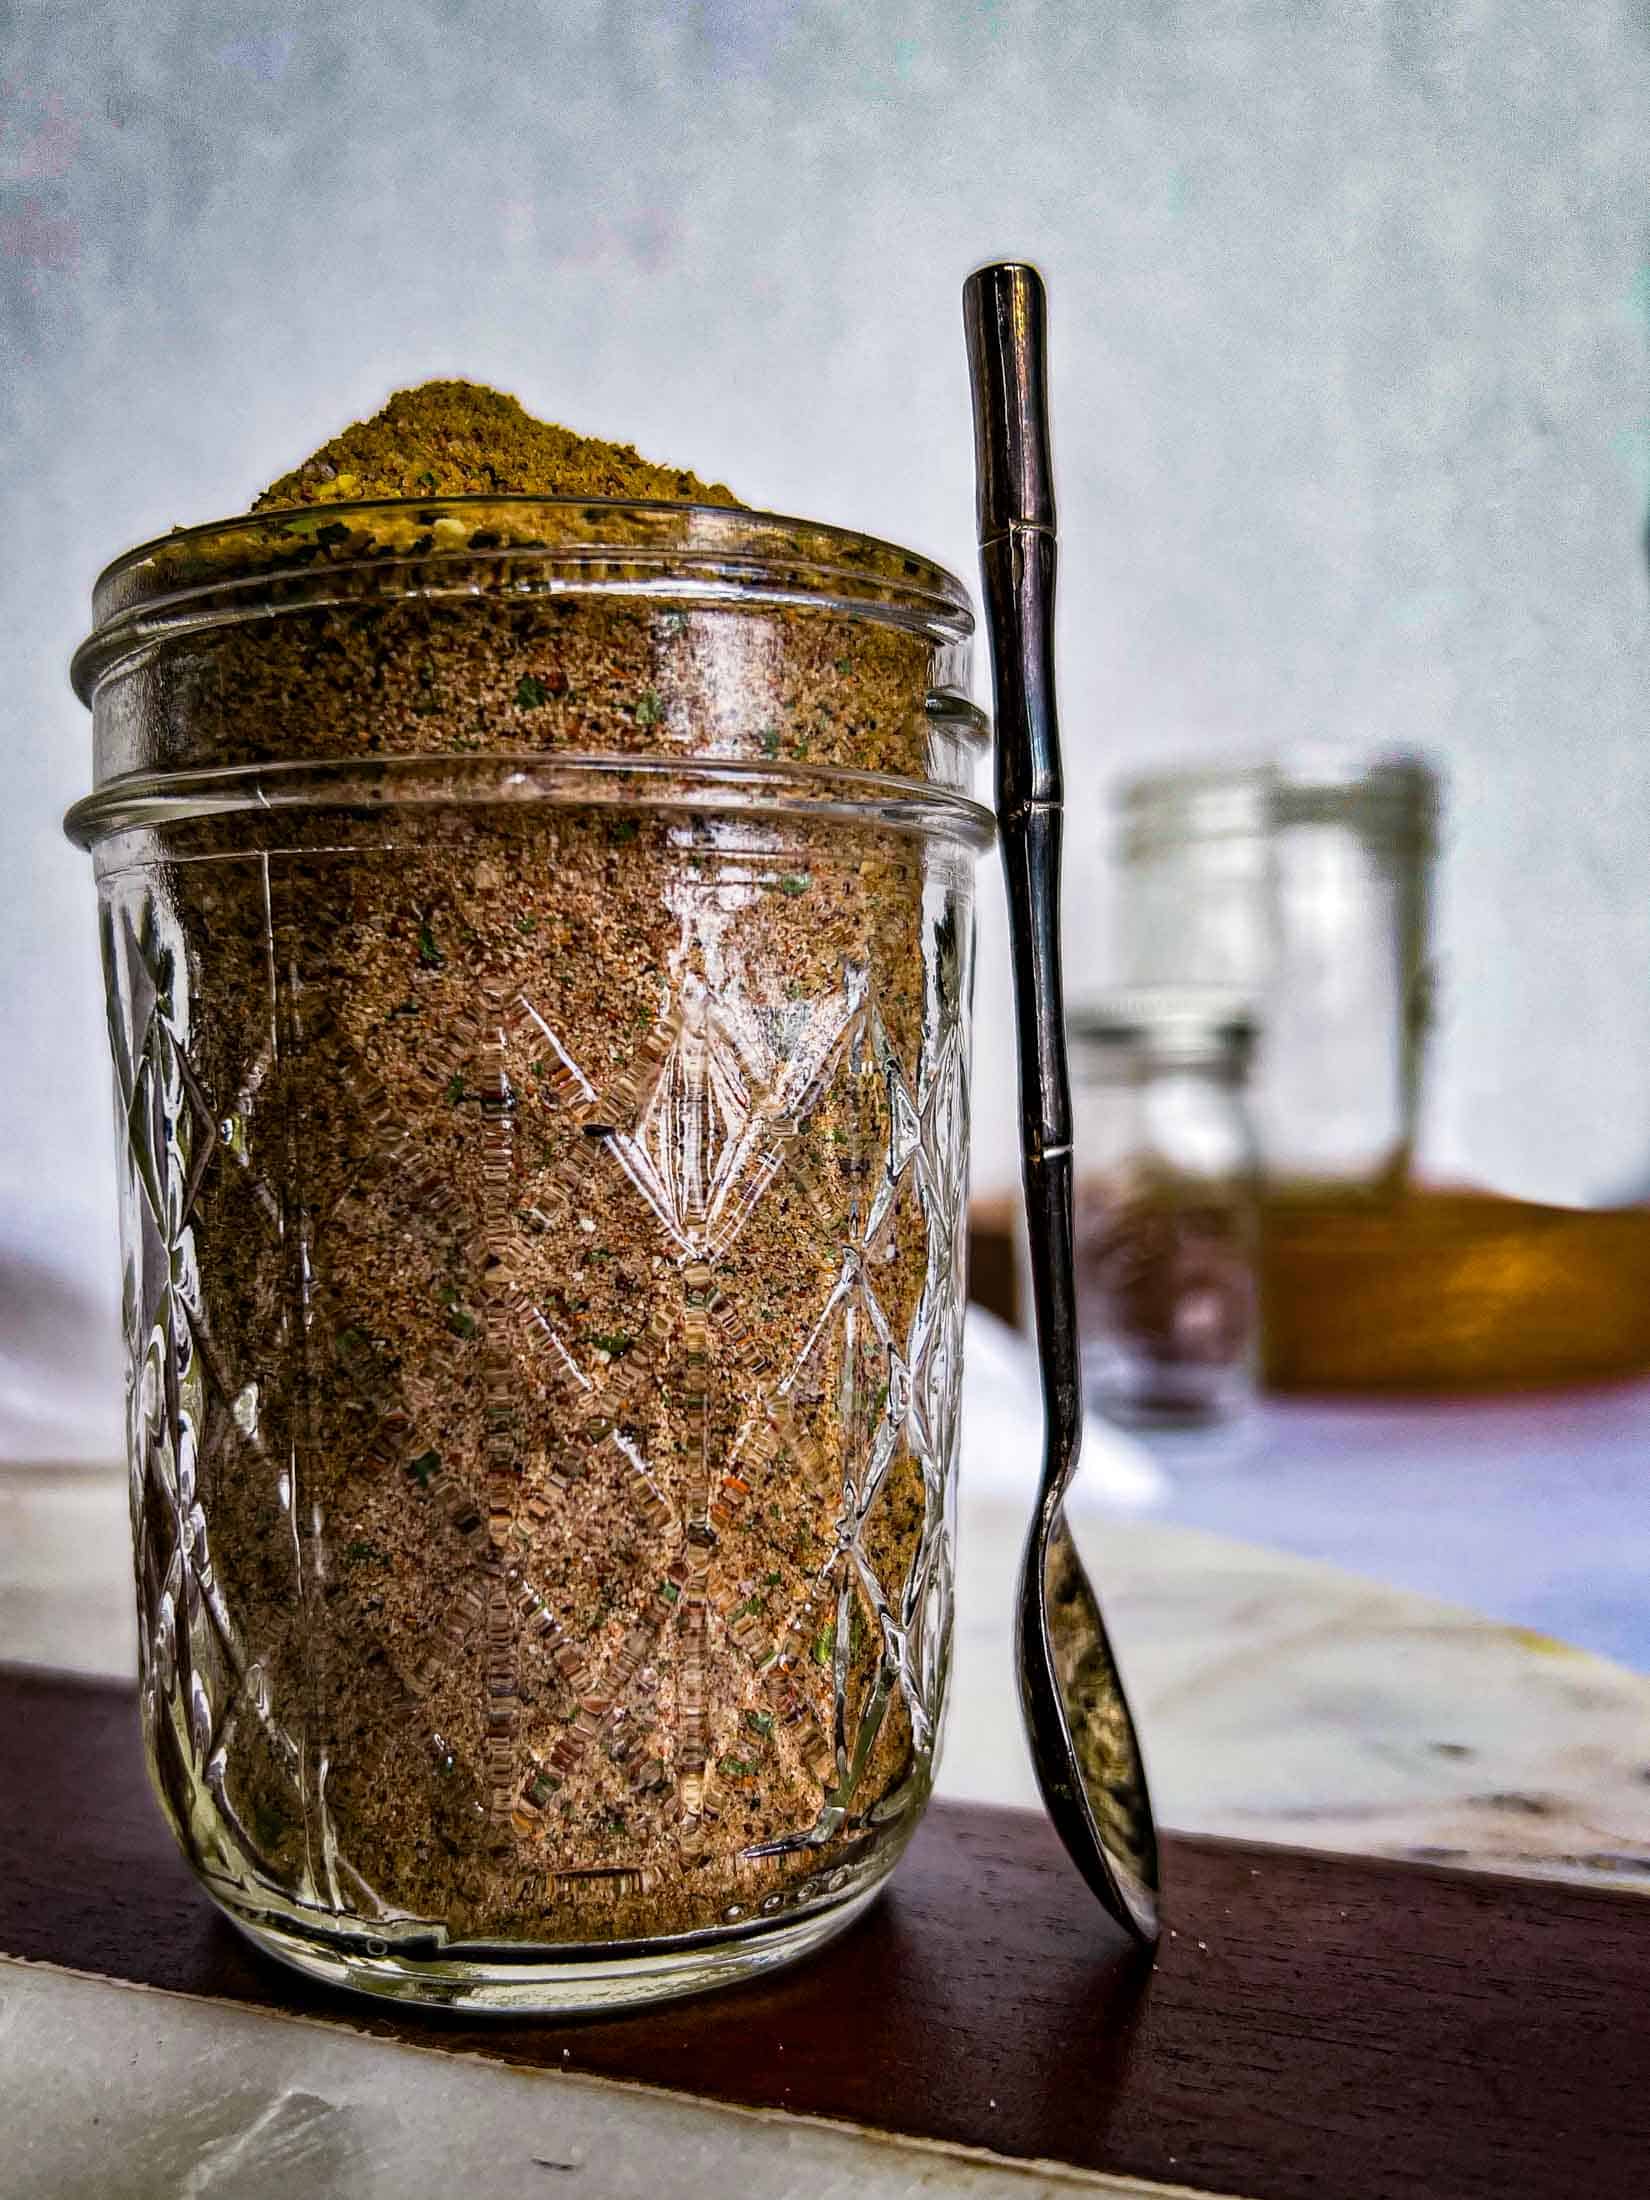 A heaping quarter pint of smoked chicken rub with a metal spoon resting on the jar.